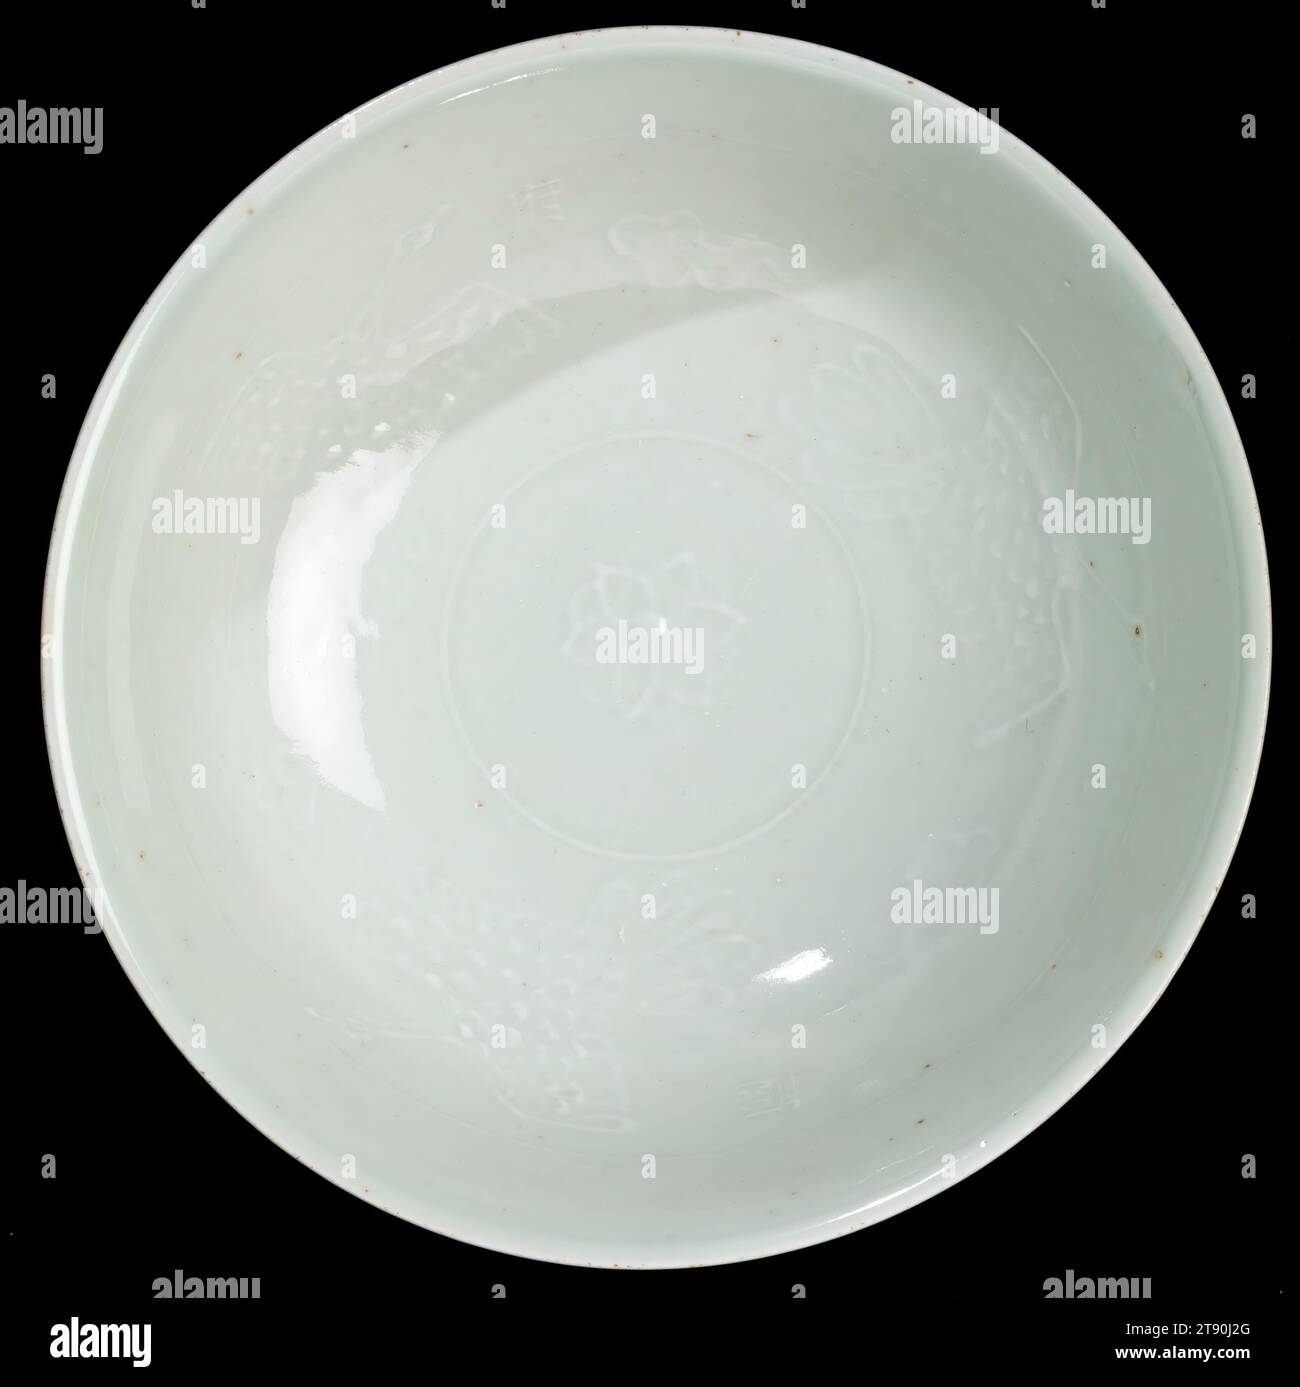 https://c8.alamy.com/comp/2T90J2G/bowl-1280-1368-h3-x-dia7-14-in-shufu-ware-porcelain-with-moulded-dcor-under-clear-glaze-china-13th-14th-century-the-yuan-dynasty-1280-1368-was-an-era-of-experiment-and-innovation-for-kilns-in-the-vicinity-of-ching-te-chen-in-kiangsu-province-one-of-the-distinct-porcelain-types-to-evolve-was-shu-fu-which-takes-its-name-from-the-low-relief-moulded-characters-shu-and-fu-meaning-privy-council-that-often-appear-as-they-do-here-on-the-inside-of-the-bowls-and-small-dishes-shu-fu-ware-is-generally-carefully-potted-with-fine-hard-bodies-and-thick-opaque-white-glazes-2T90J2G.jpg